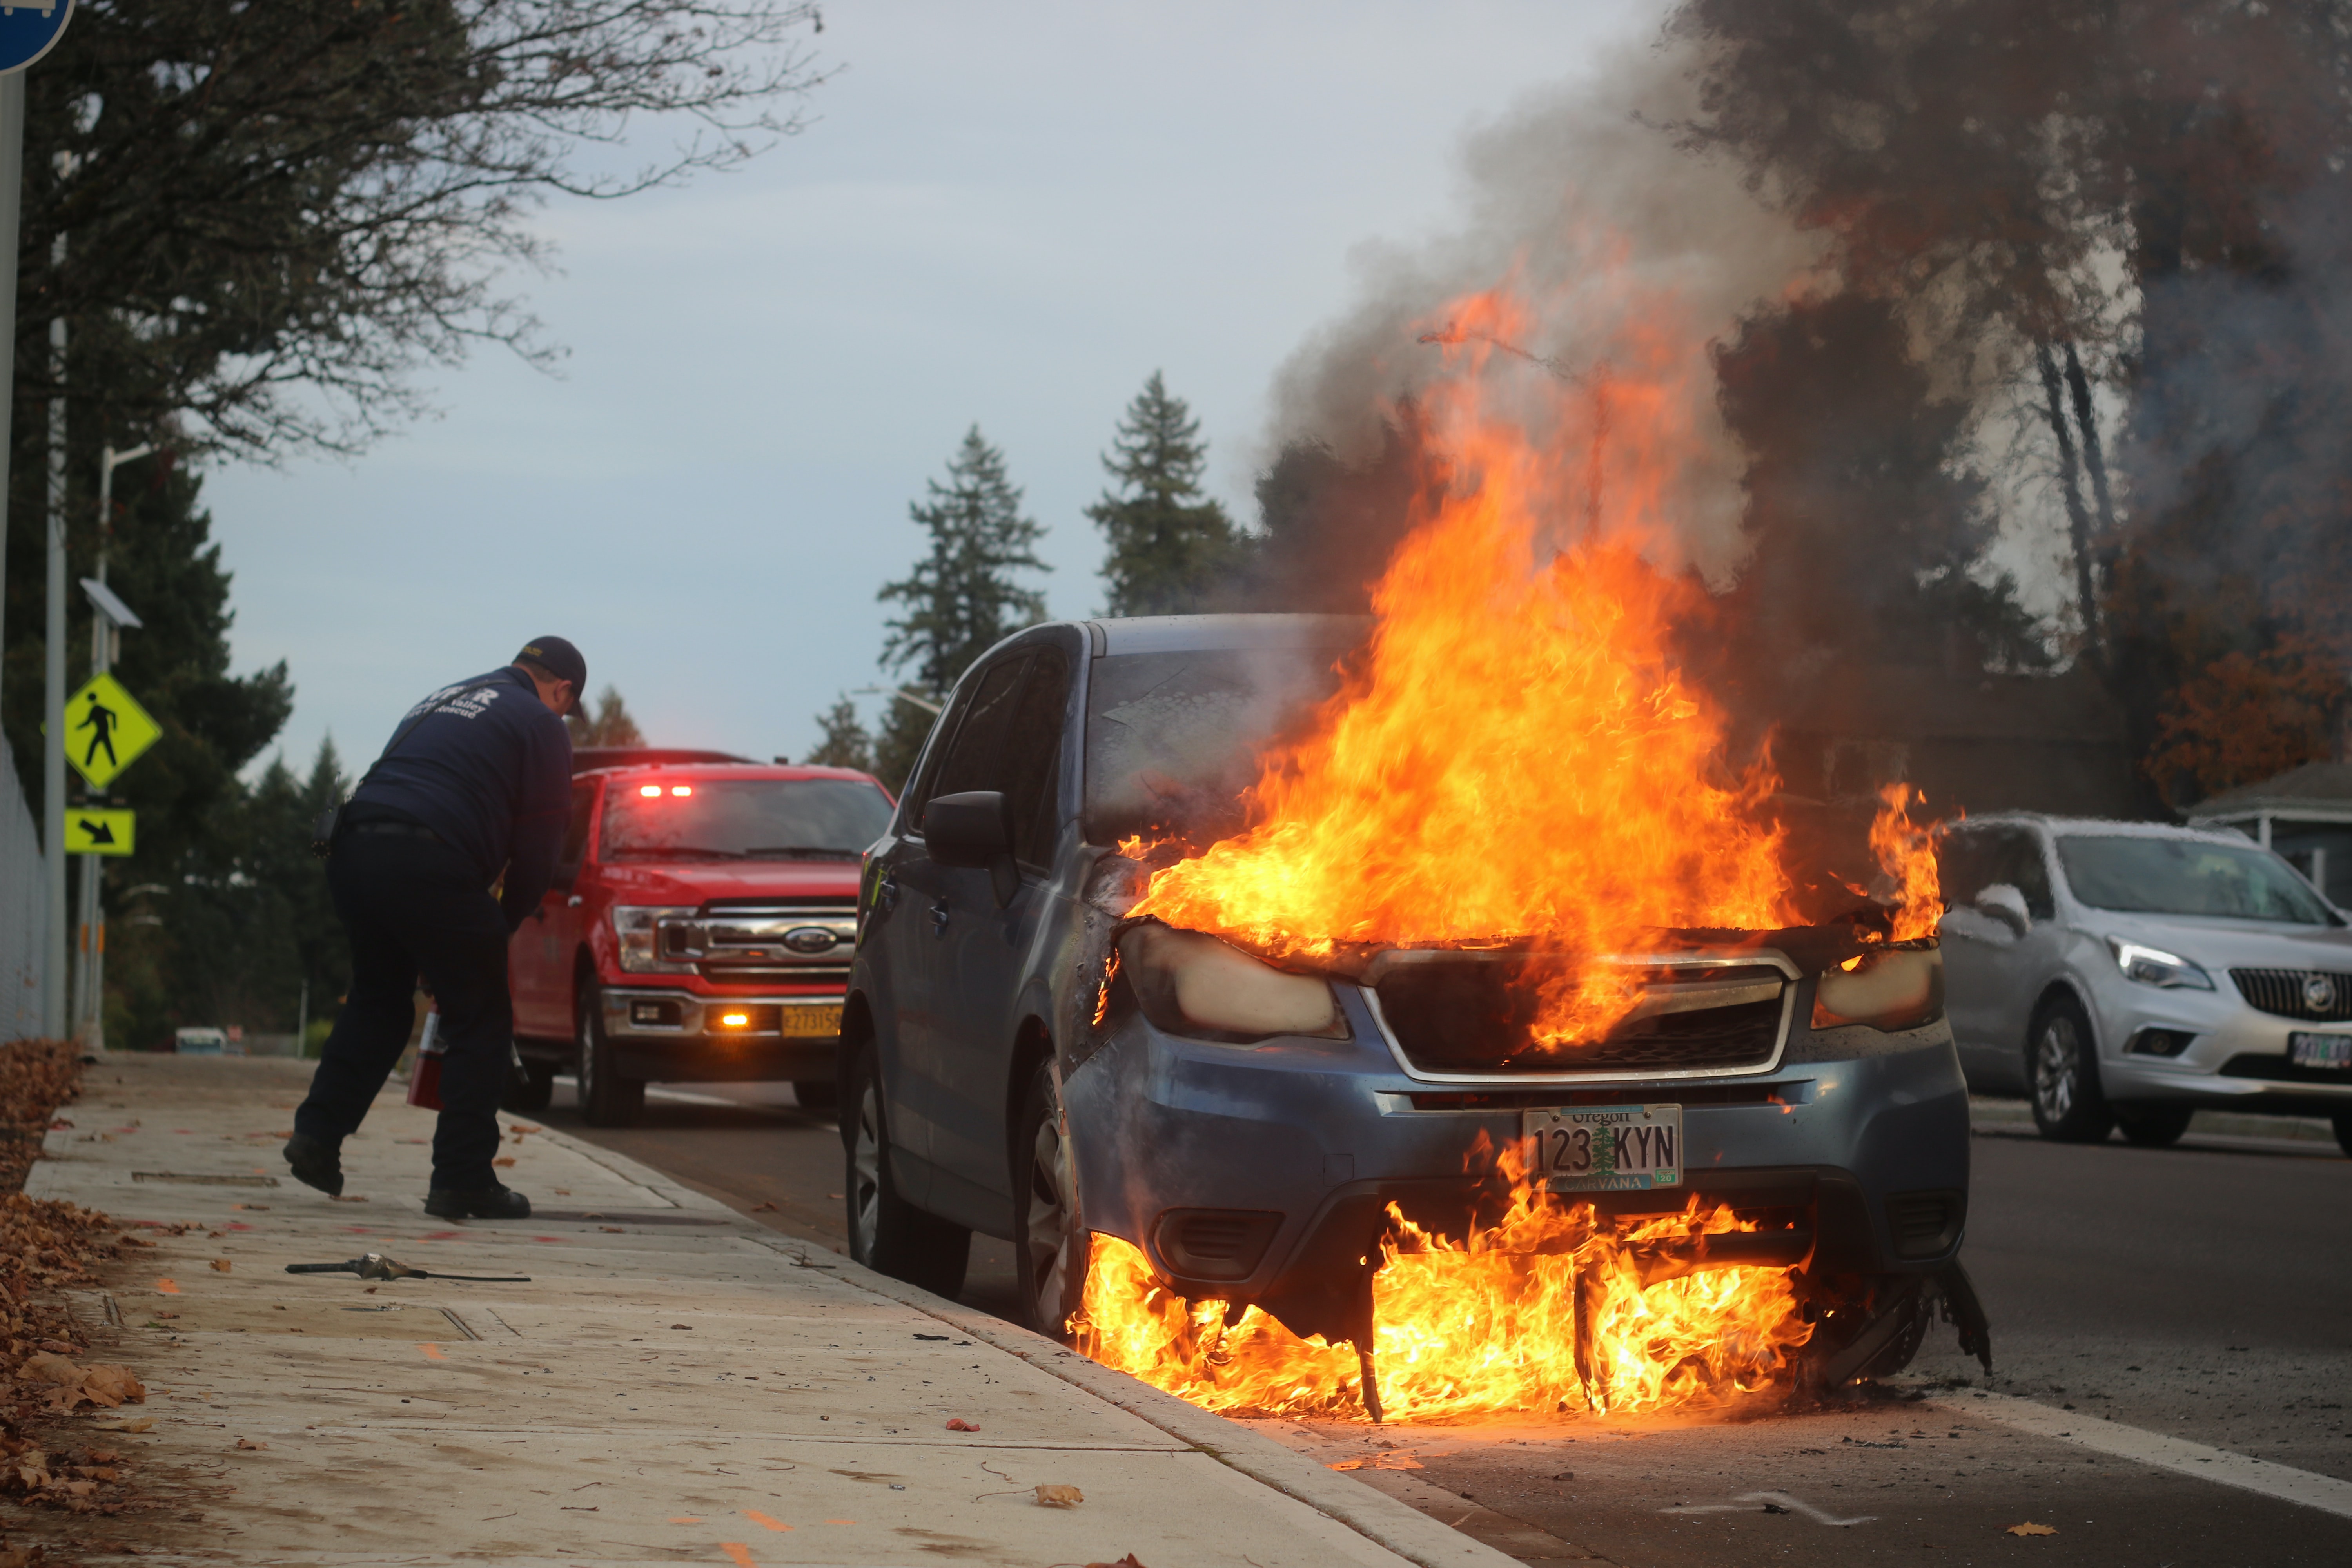 Emergency personnel respond to a vehicle fire.